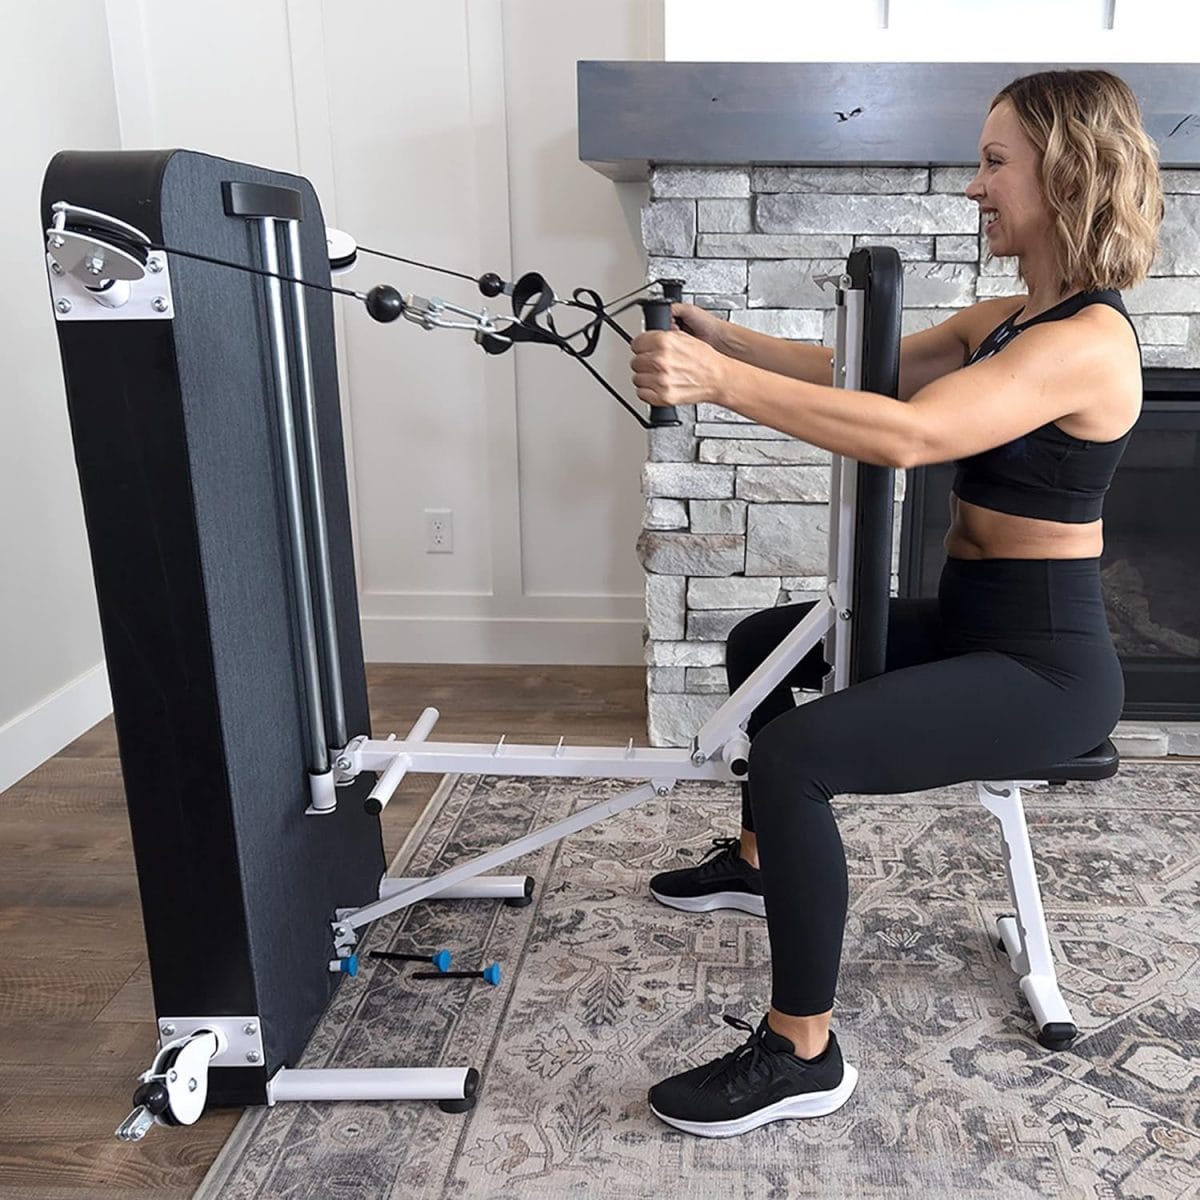 Sportsoul Home Gym Toning Gym Total Body Workout Machine The Best Fitness Equipment And Work From Home Fitness In A Compact Space Gym Equipped With A Phone Mount Exercise Equipment For Home